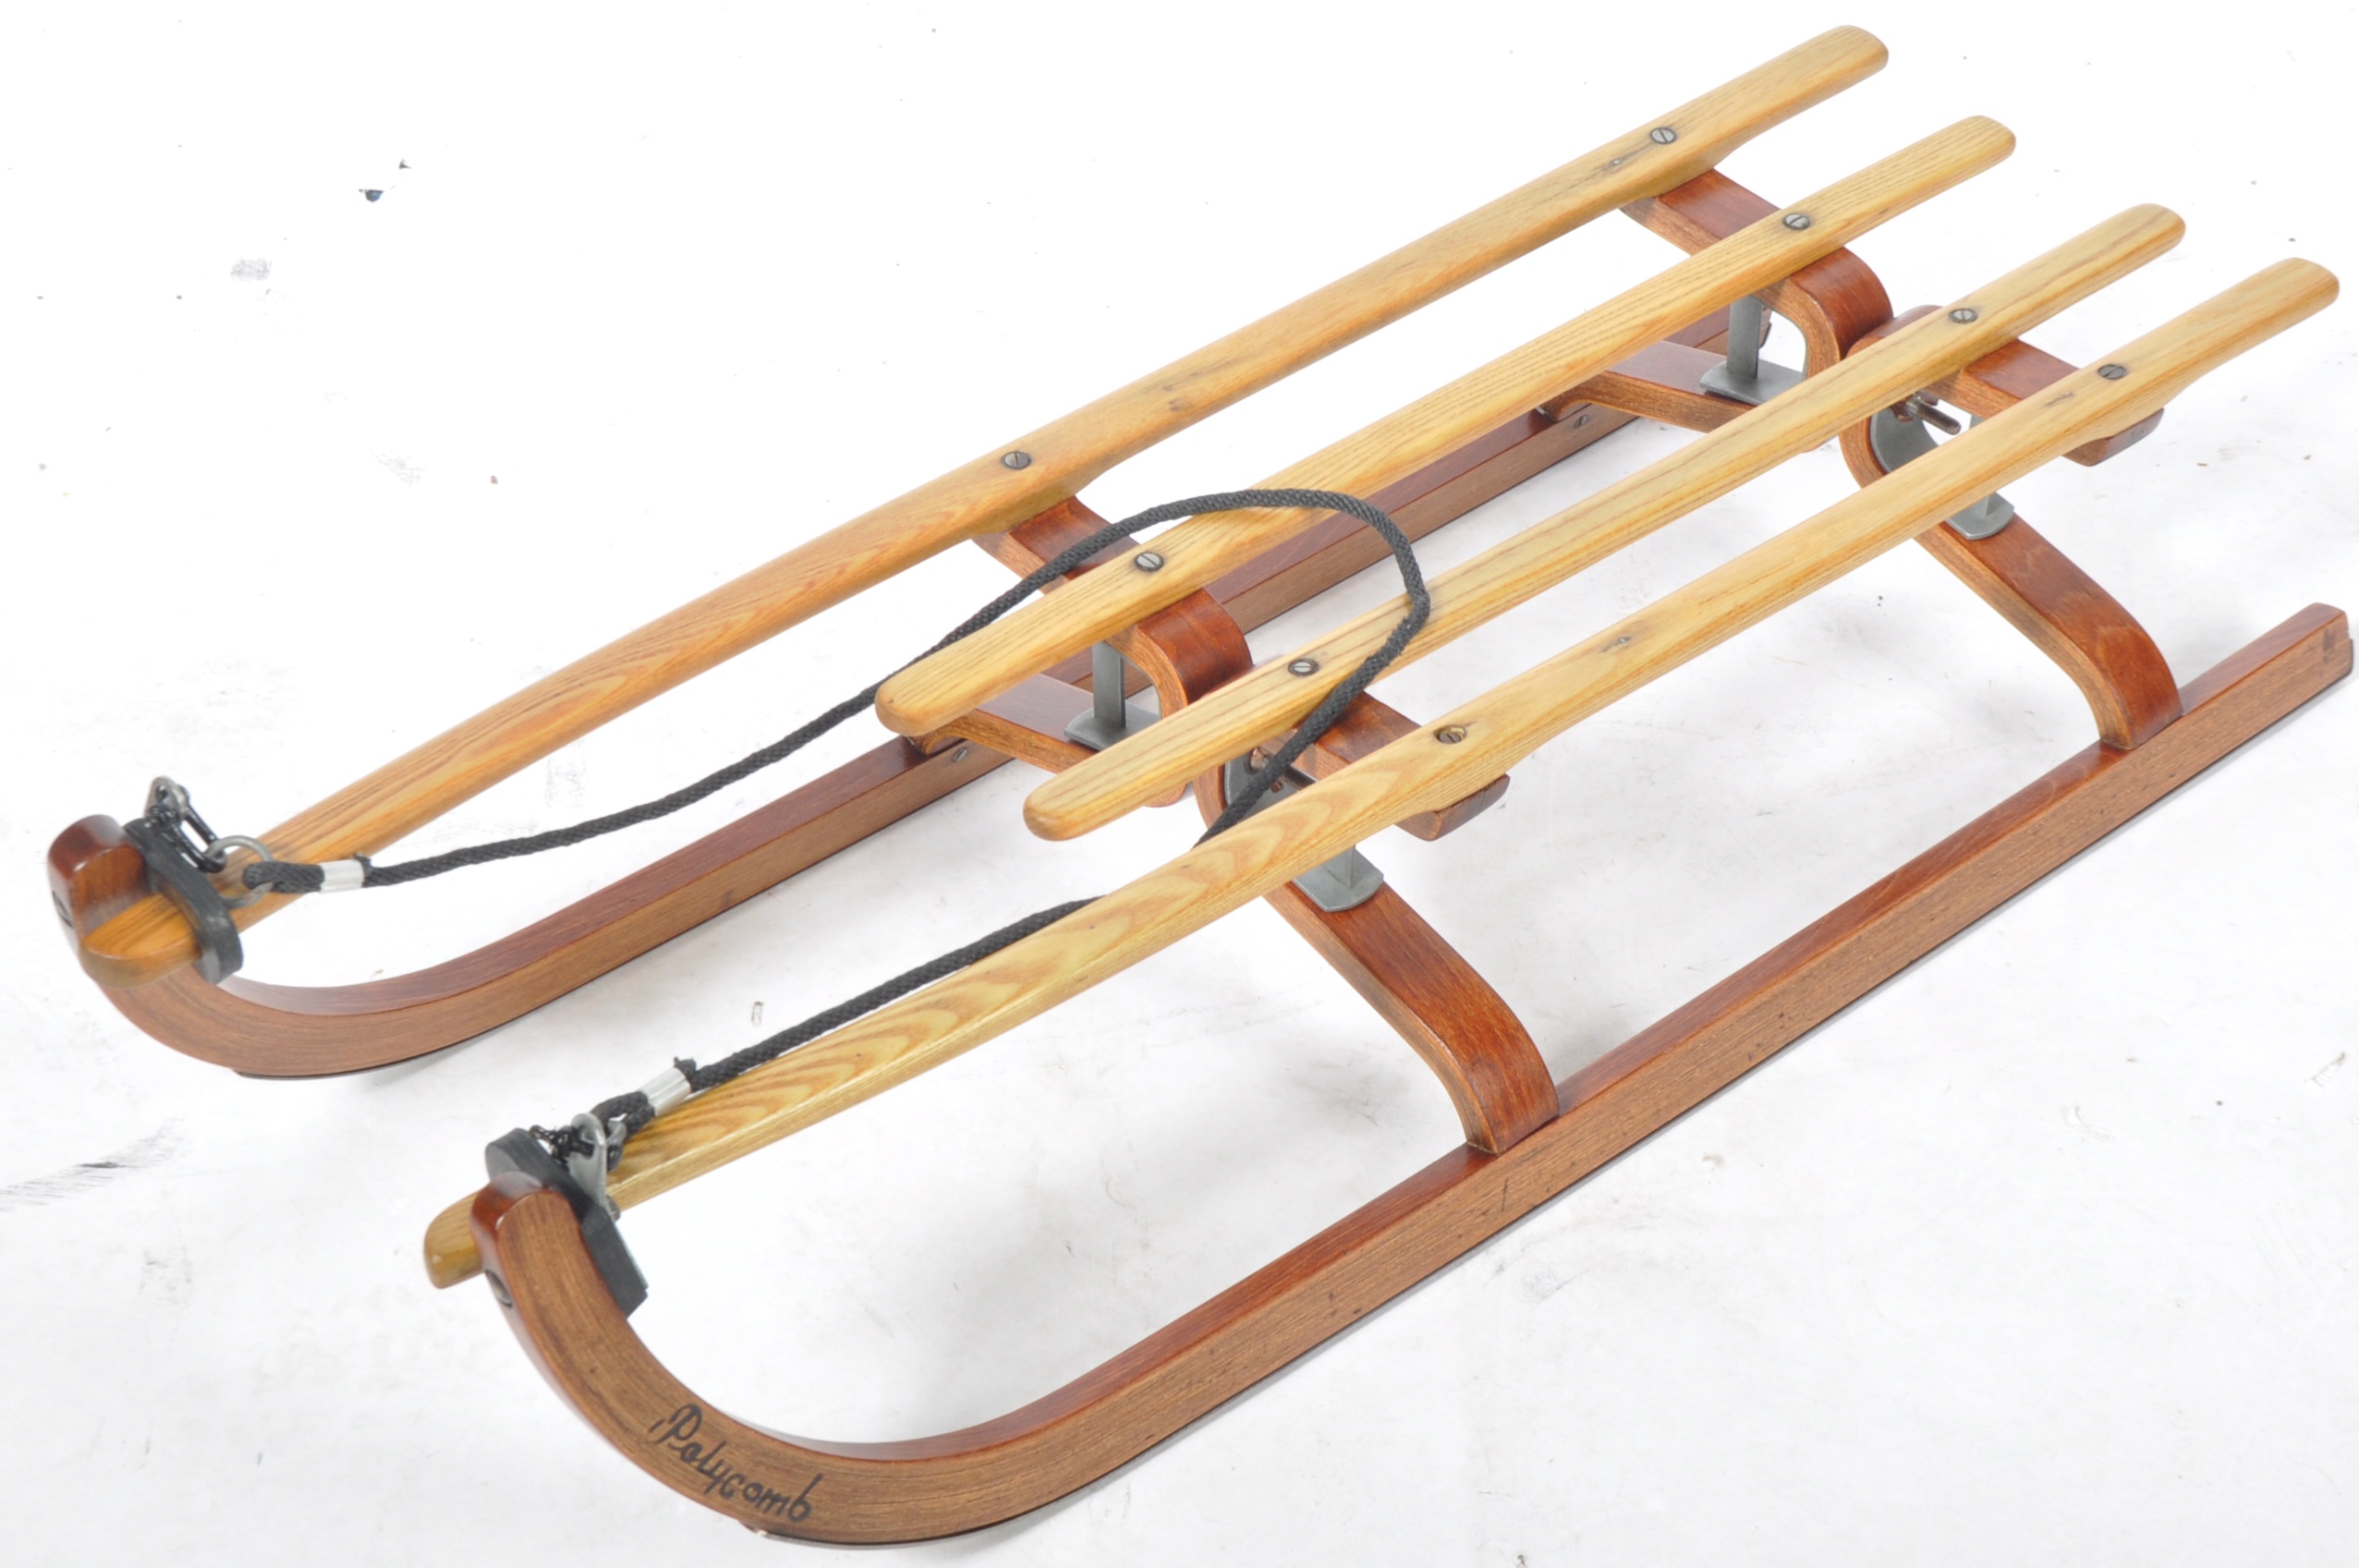 VINTAGE BENTWOOD AND OAK SLED / BOBSLEIGH BY PLAYCOMB - Image 2 of 5